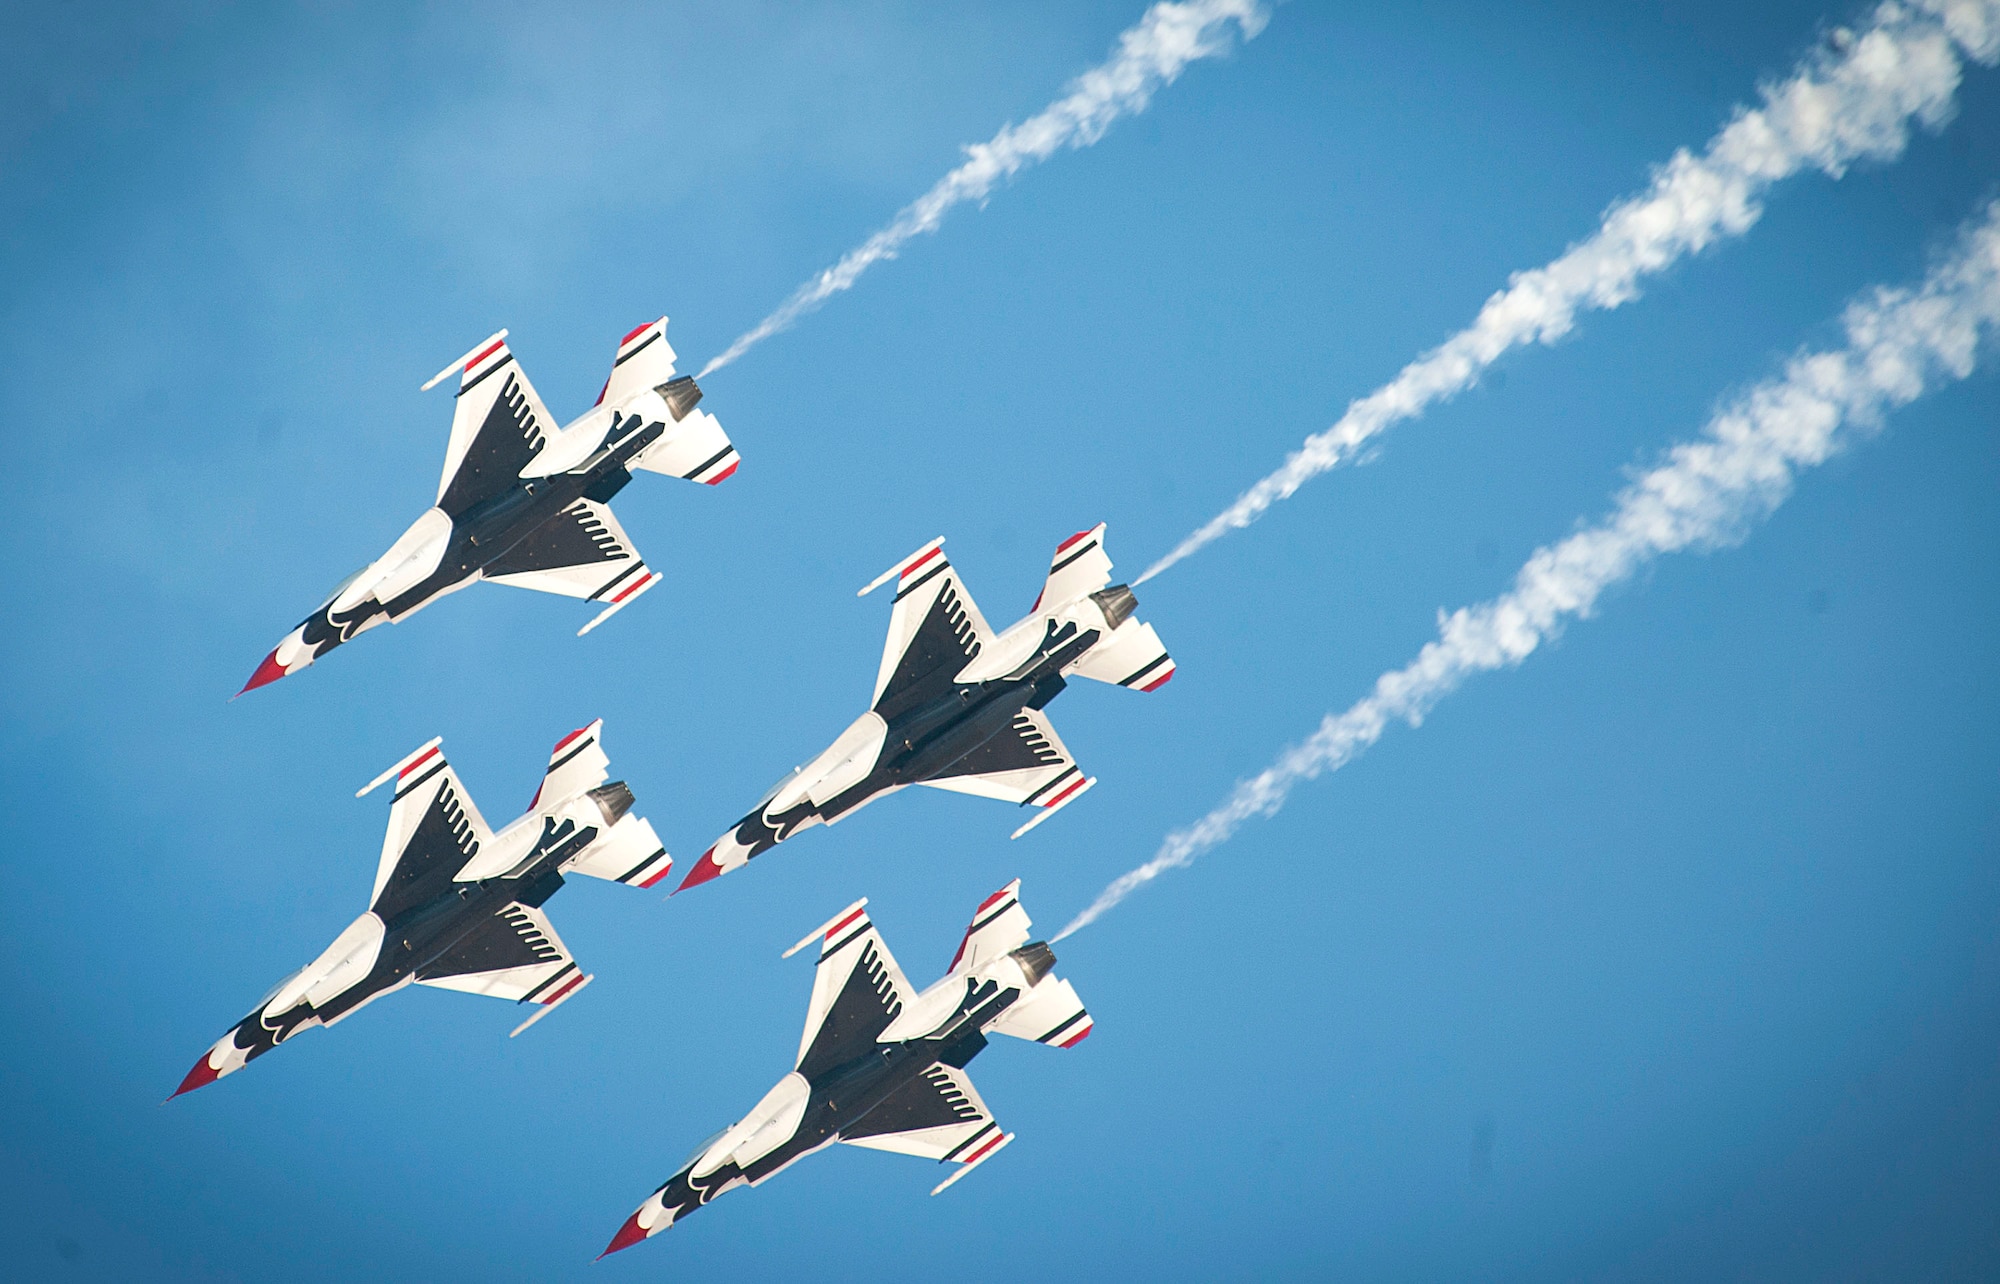 Members of the U.S. Air Force Thunderbirds Air Demonstration Squadron fly in an aerial performance during the Aviation Nation air show on Nellis Air Force Base, Nev., Nov. 11, 2016. The Thunderbirds’ performance at Aviation Nation marked their final show of the 2016 season. (U.S. Air Force photo by Airman 1st Class Kevin Tanenbaum/Released)